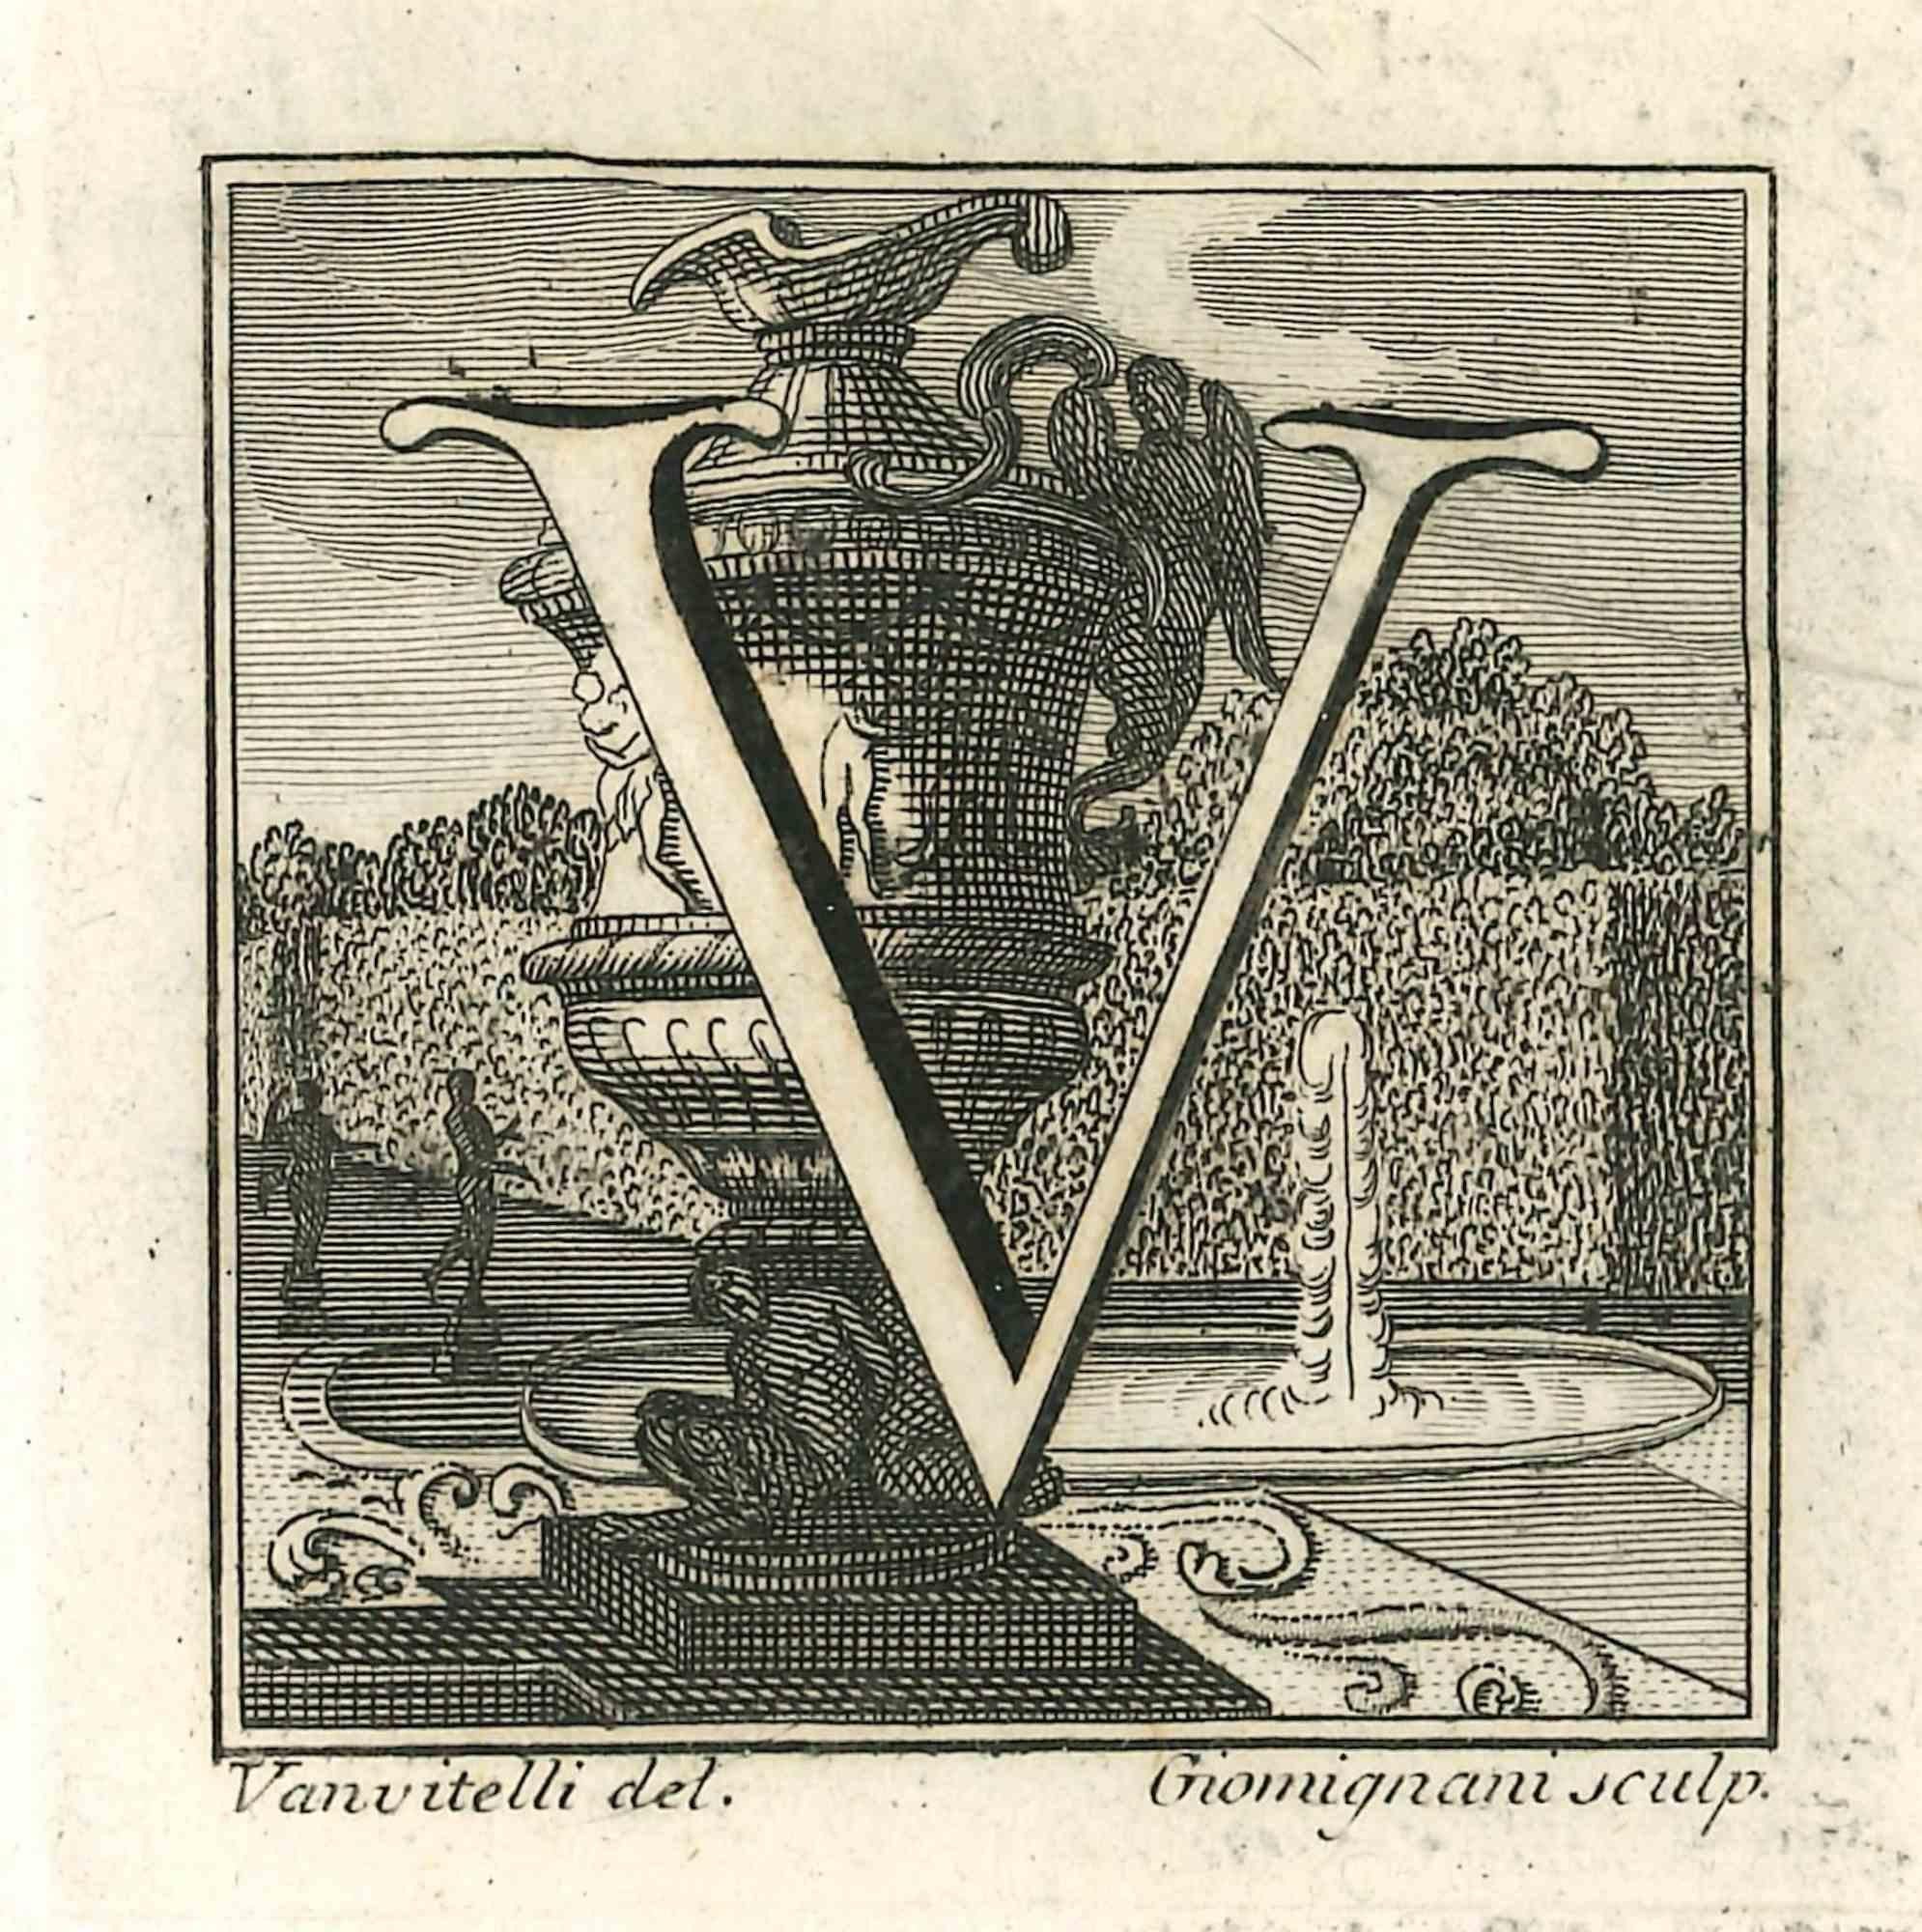 Letter V is an Etching realized by Luigi Vanvitelli in 18th century.

The etching belongs to the print suite “Antiquities of Herculaneum Exposed” (original title: “Le Antichità di Ercolano Esposte”), an eight-volume volume of engravings of the finds